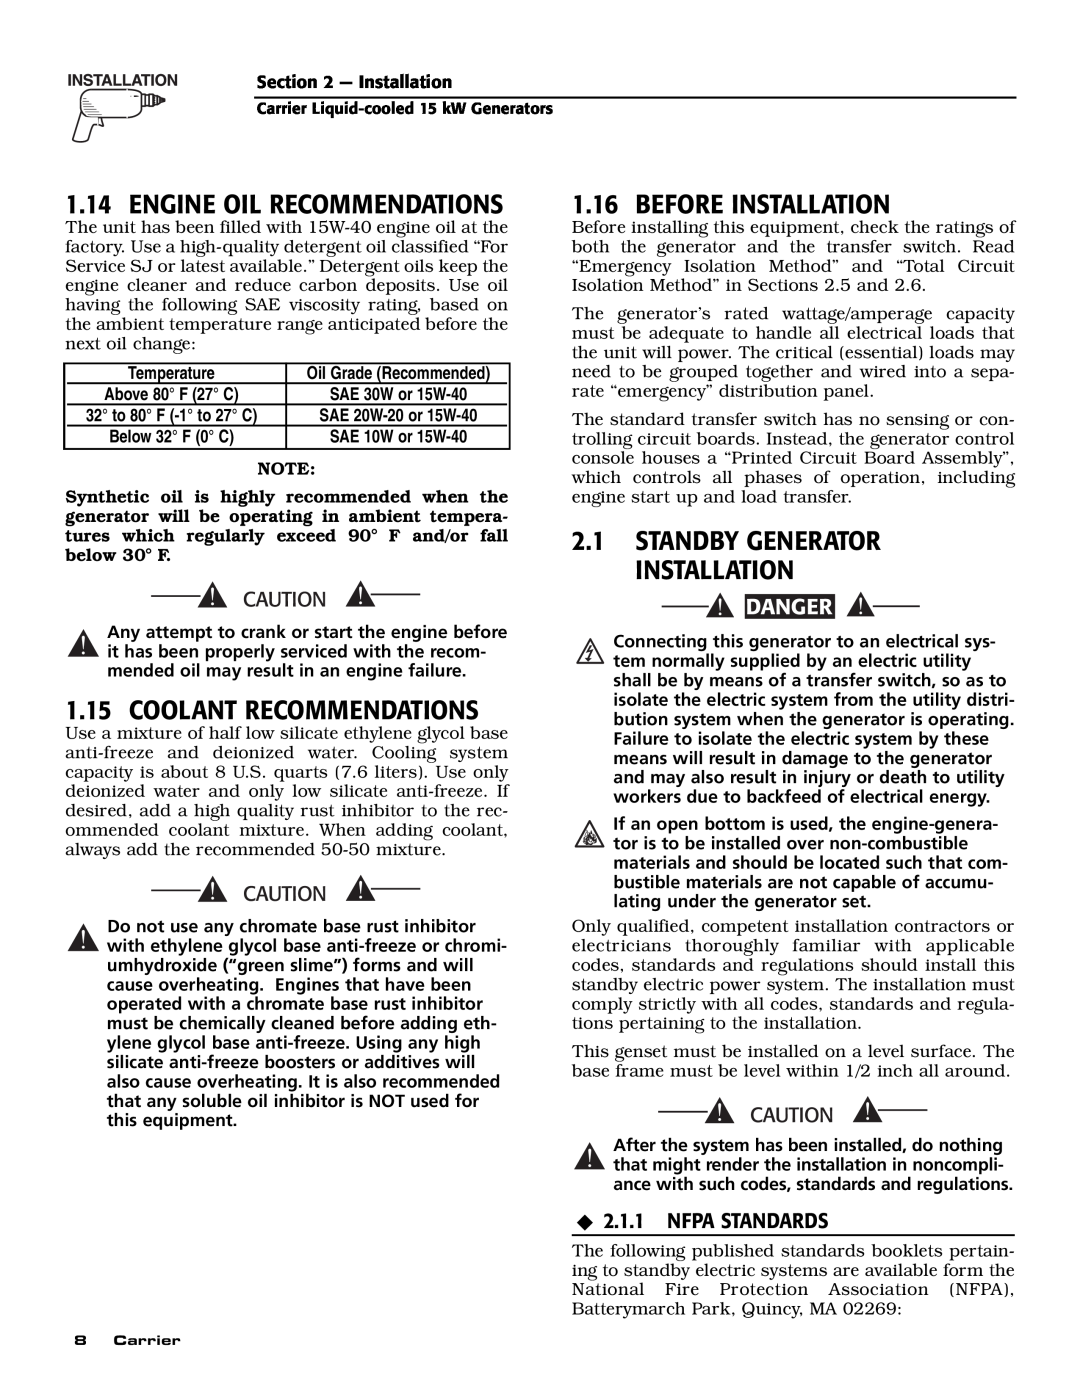 Generac ASPAS1CCL015 Engine Oil Recommendations, Coolant Recommendations, Before Installation, ‹ 2.1.1 NFPA STANDARDS 